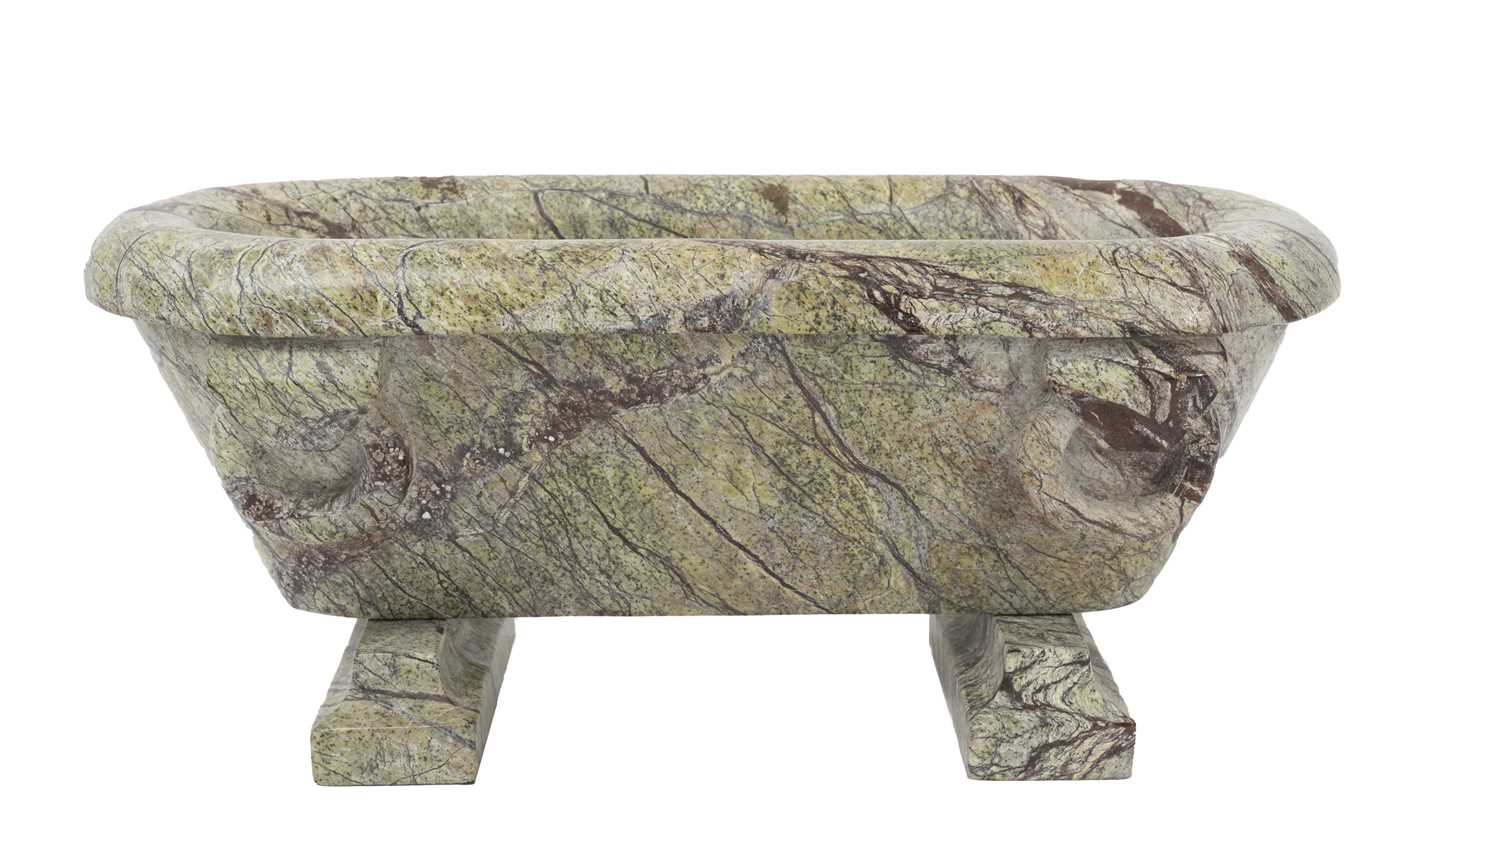 A GRAND TOUR STYLE GREEN MARBLE MODEL OF A ROMAN BATH - Image 2 of 2